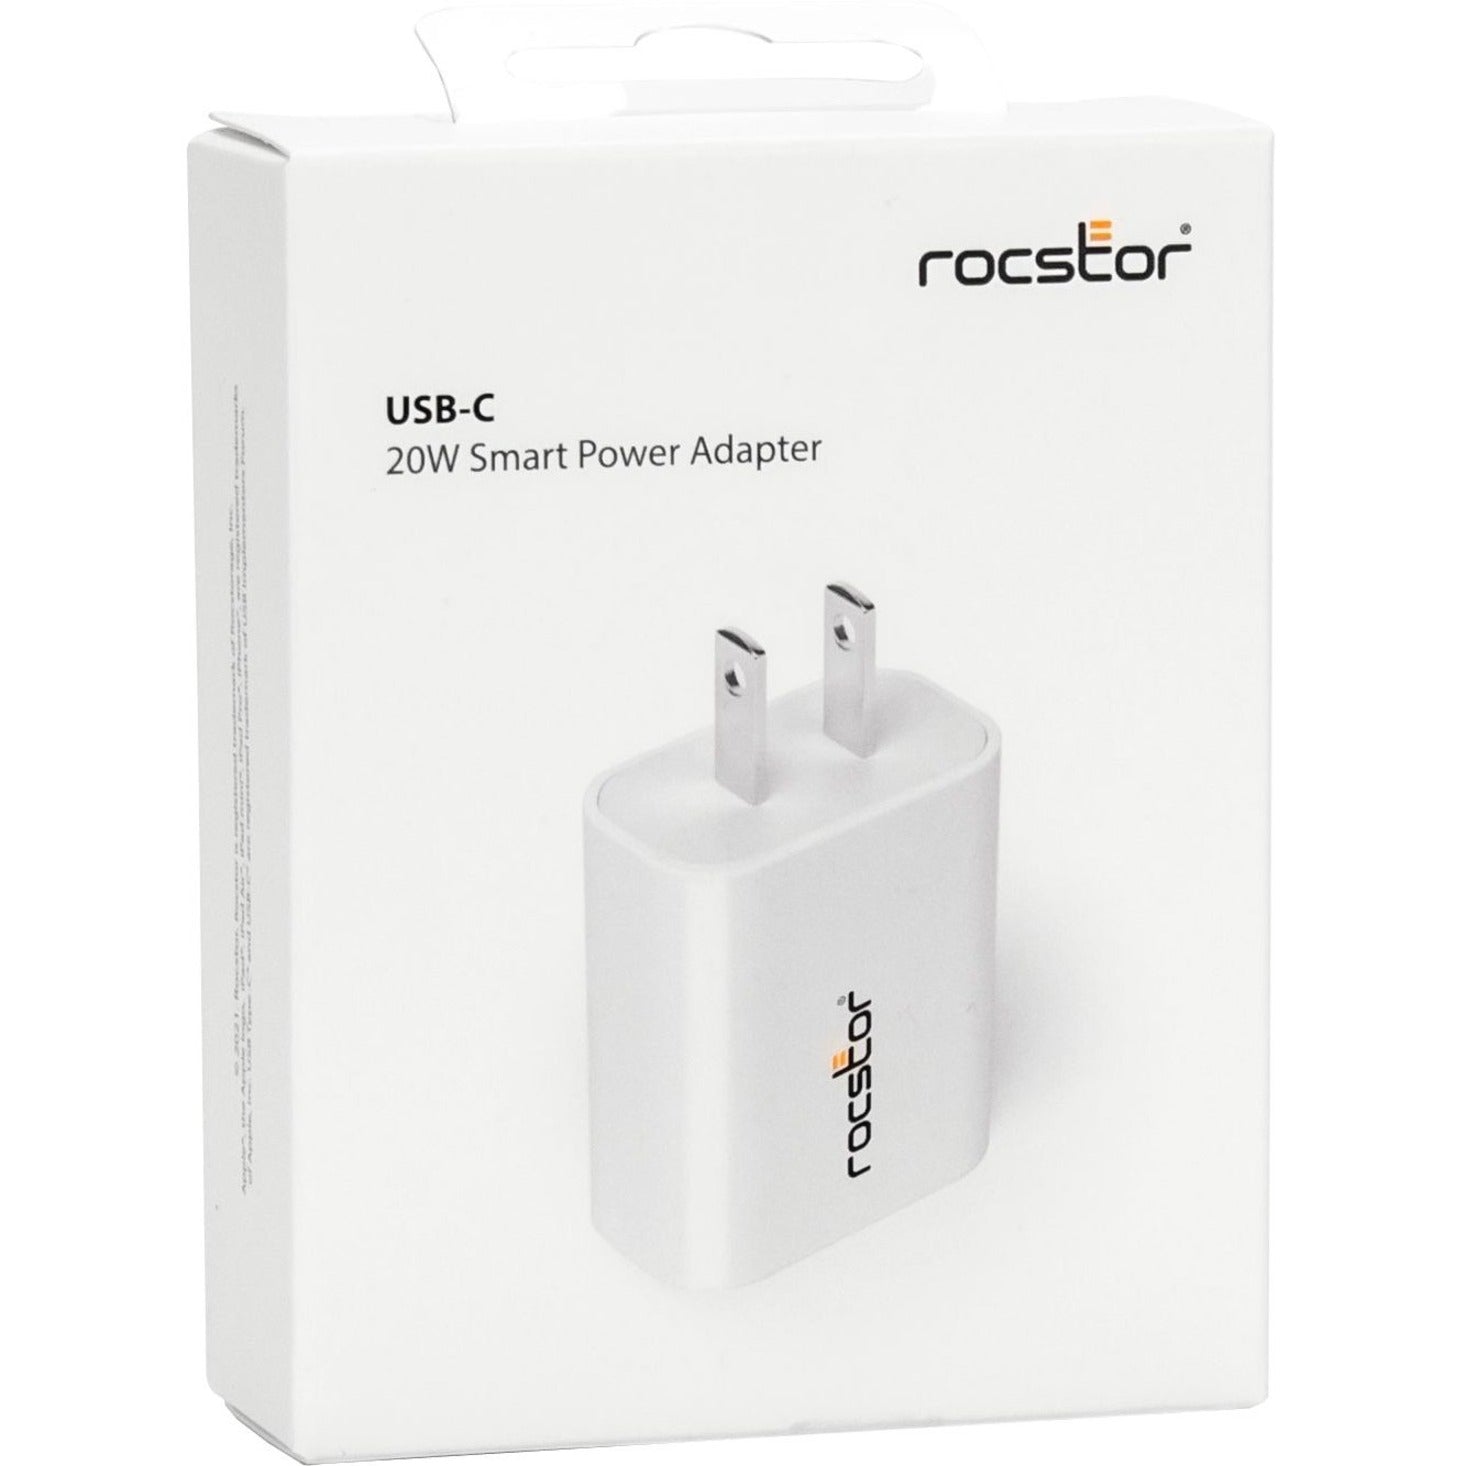 Rocstor Y10A256-W1 20W Smart USB-C Power Adapter, Fast Charging for Apple Products